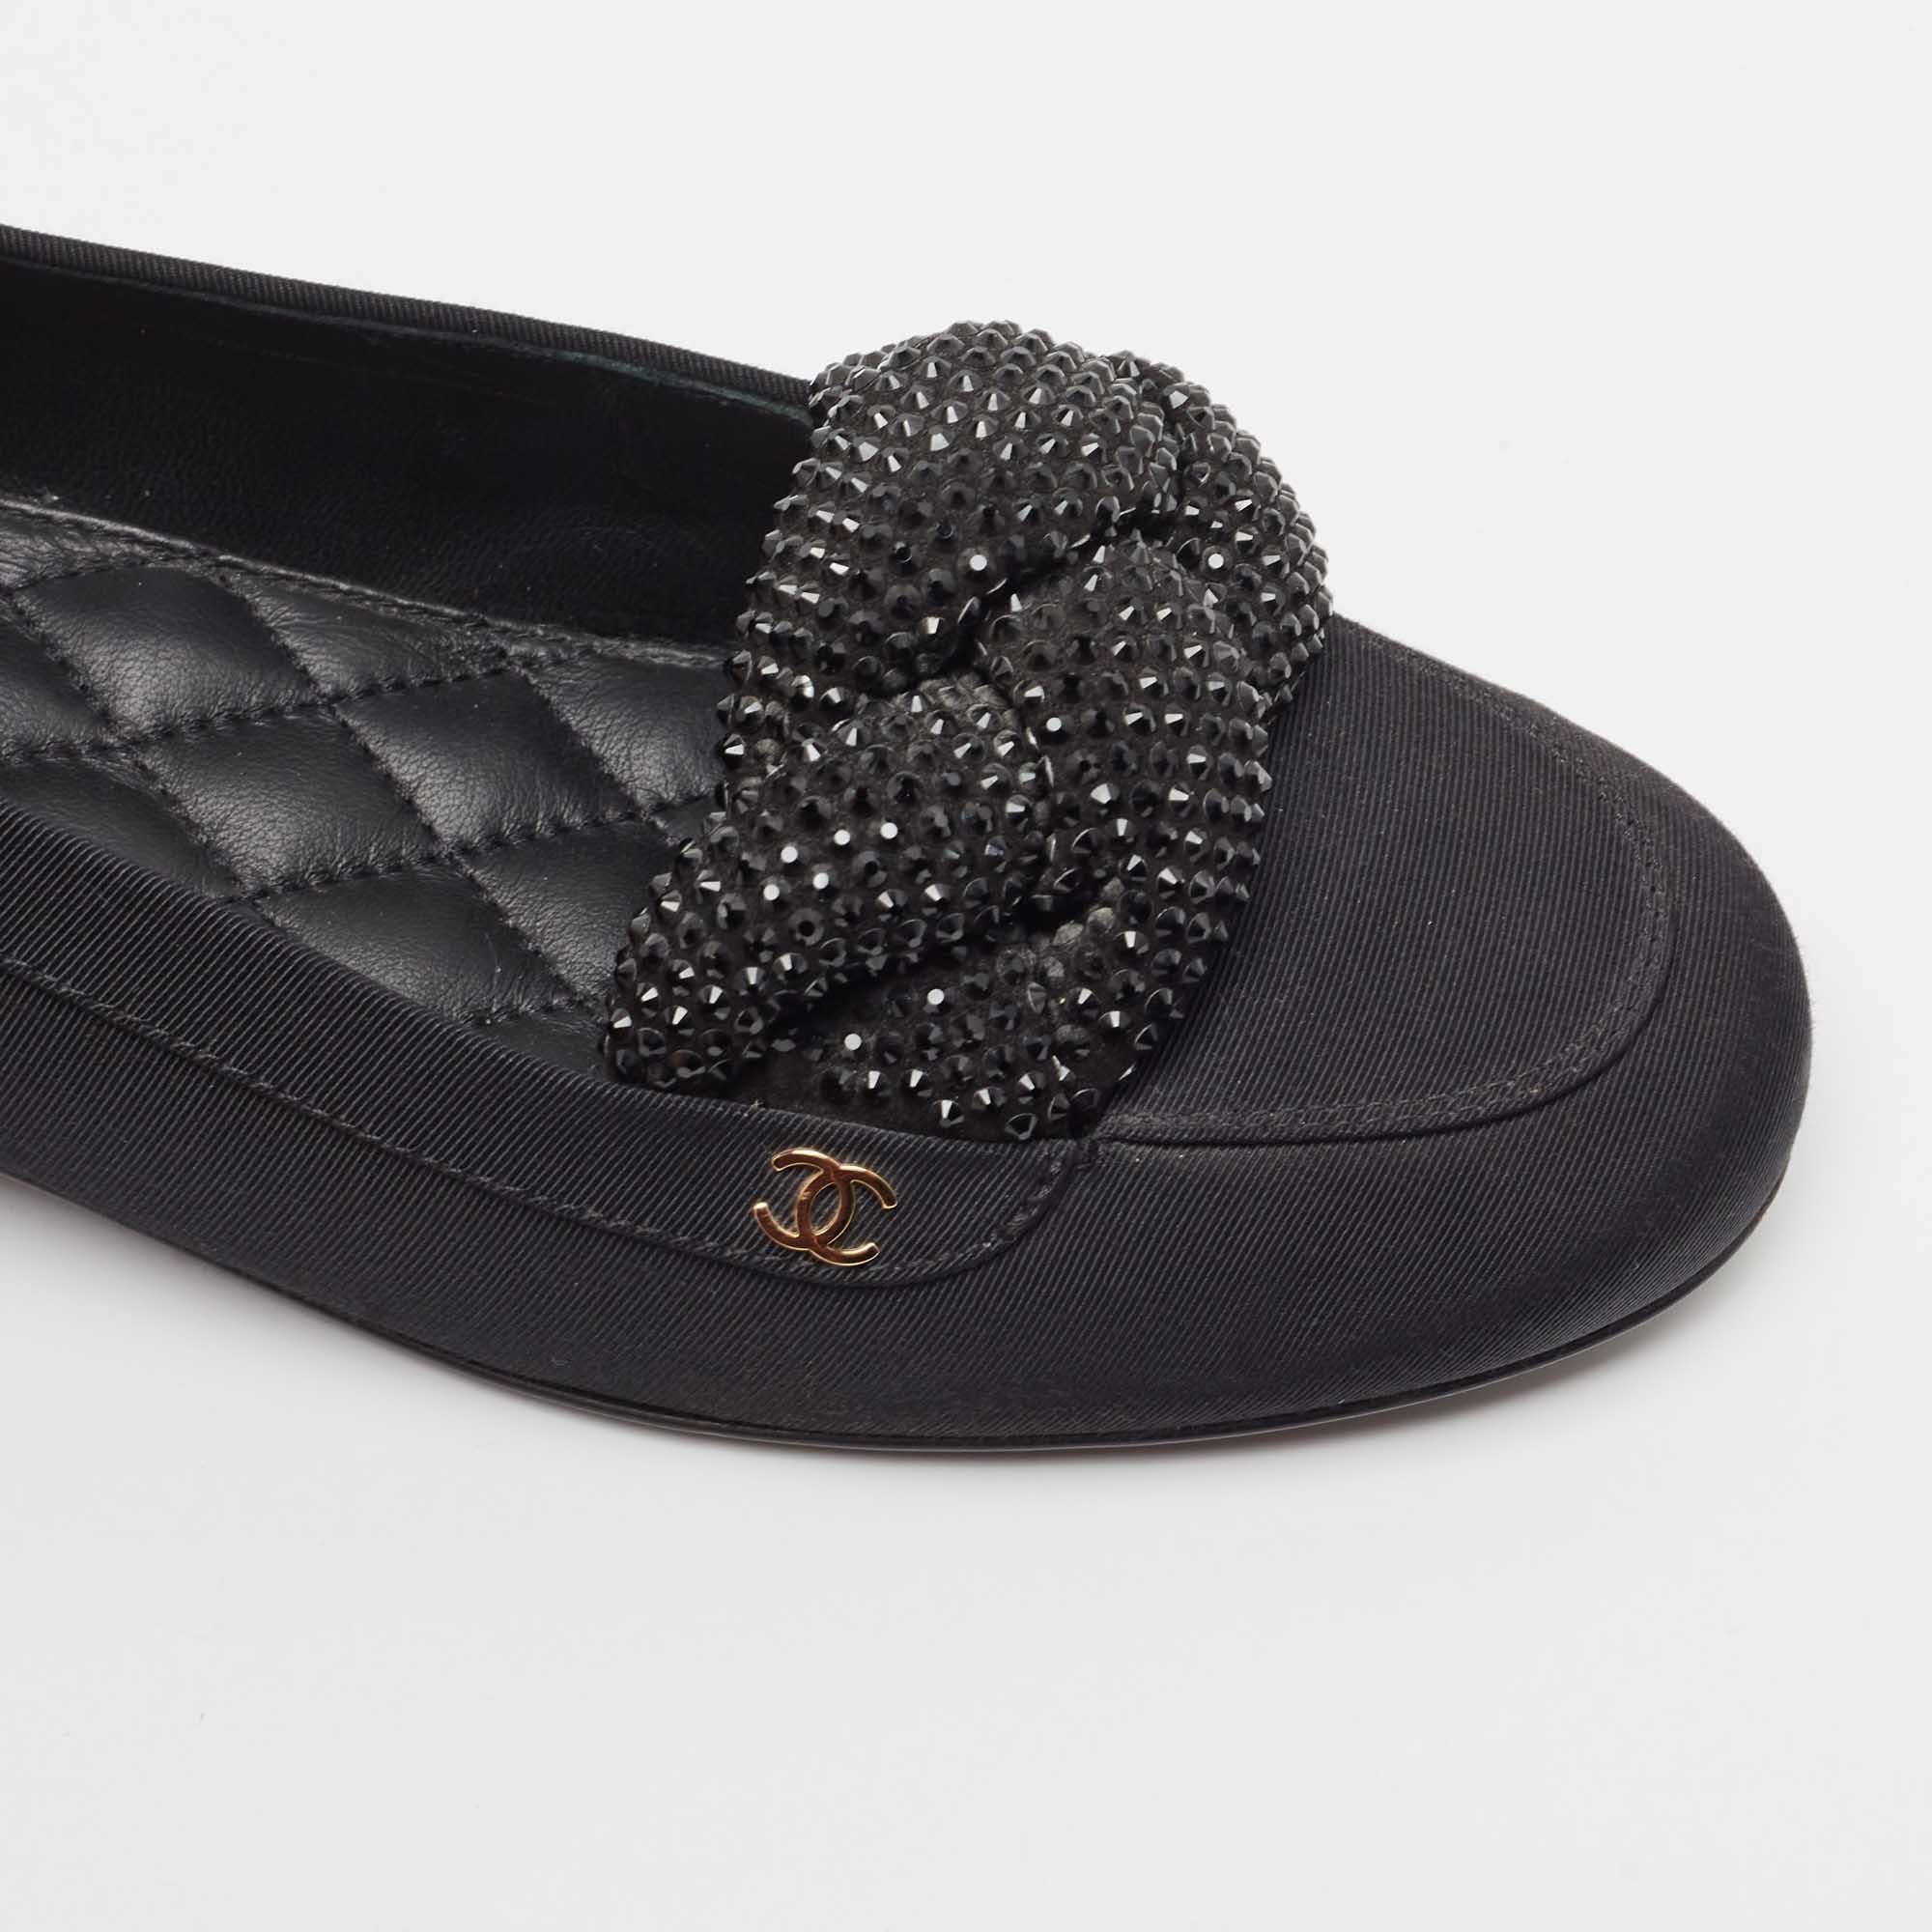 Chanel Black Fabric CC Crystal Embellished Loafers Size 37 2